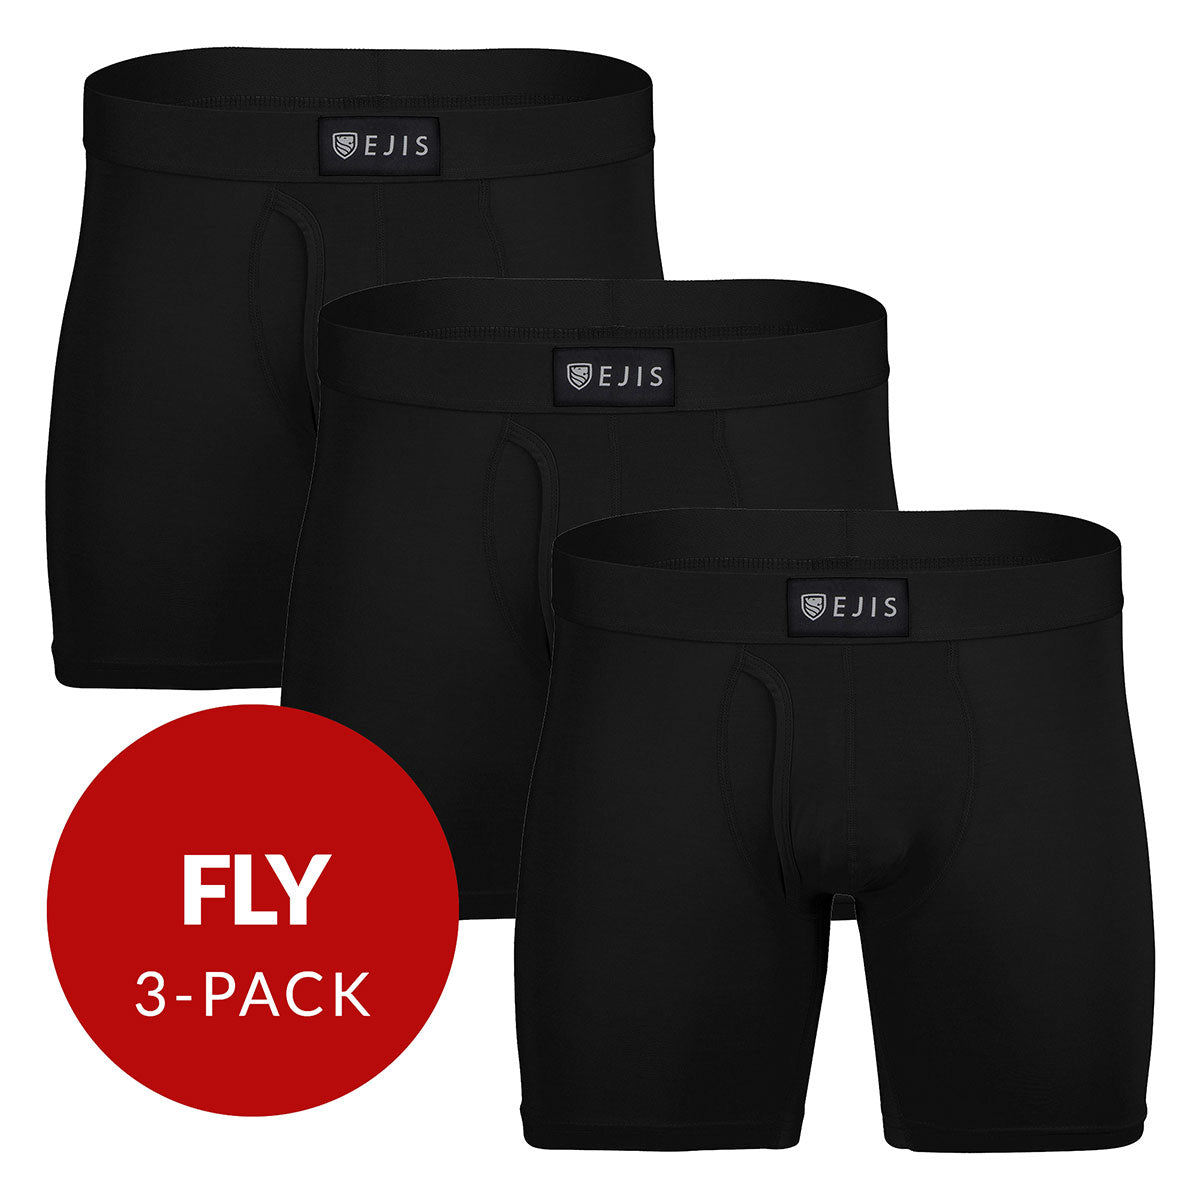 Sweat Proof Men's Boxer Briefs with Fly - Black 3-Pack - Ejis